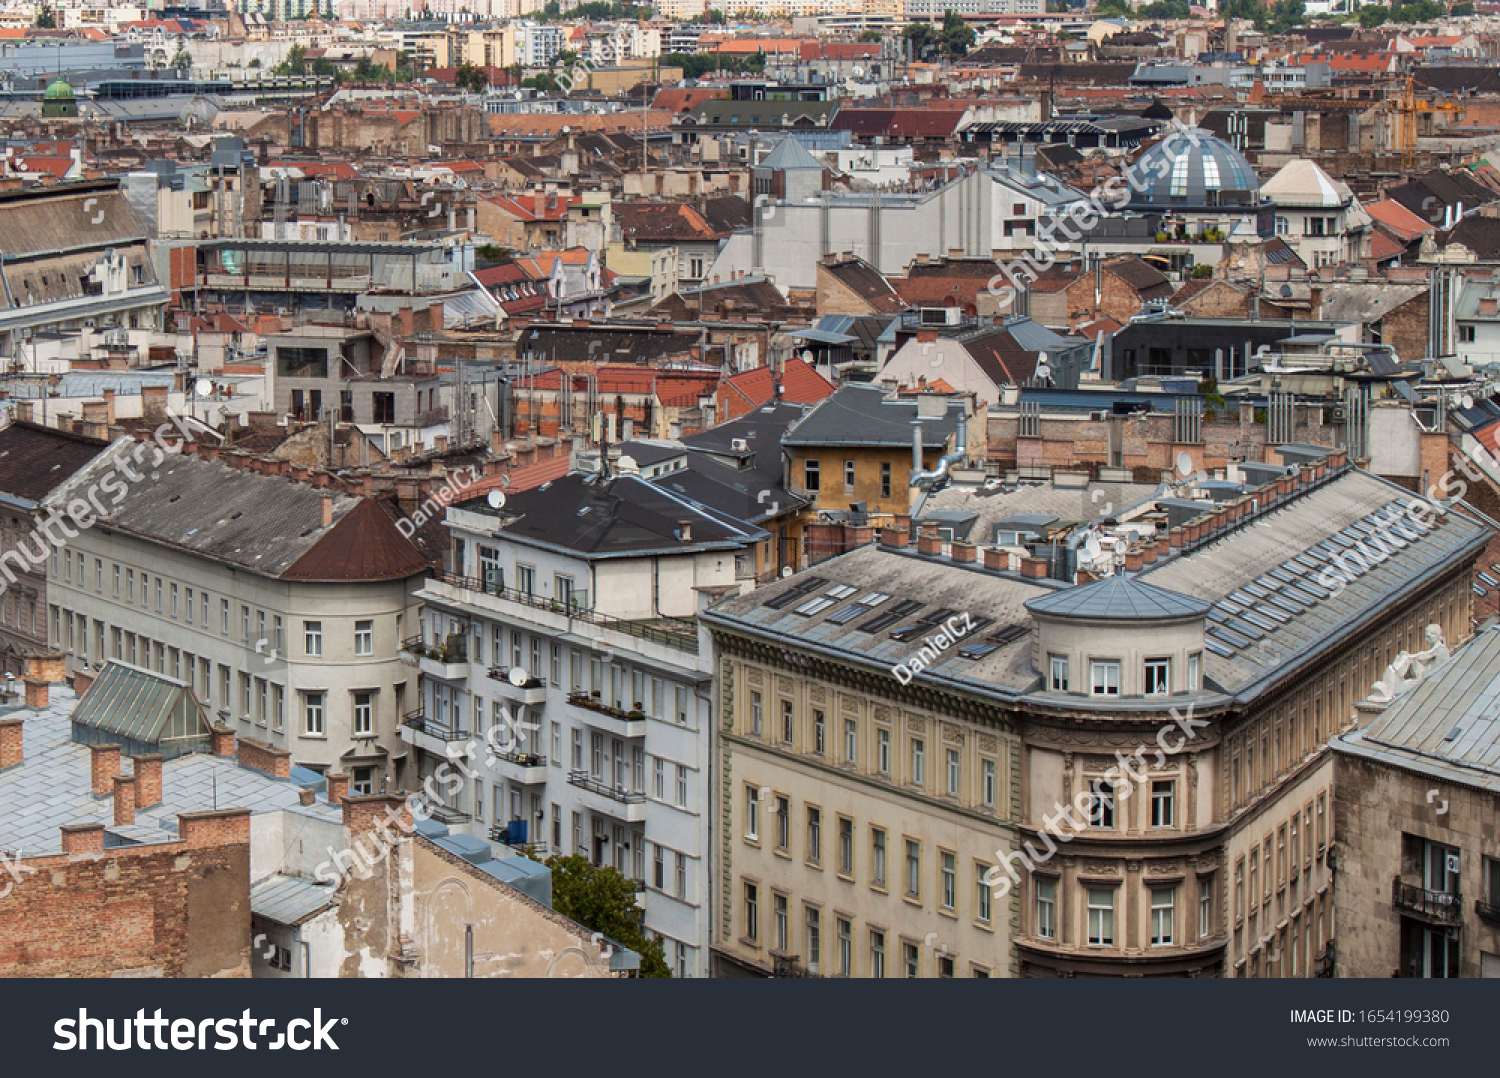 Skyline of Budapest, Hungary, Europe. Rooftop view from the tower of St. Stephen's Basilica. Historical buildings, towers and colorful rooftops. European capital city skyline. #1654199380